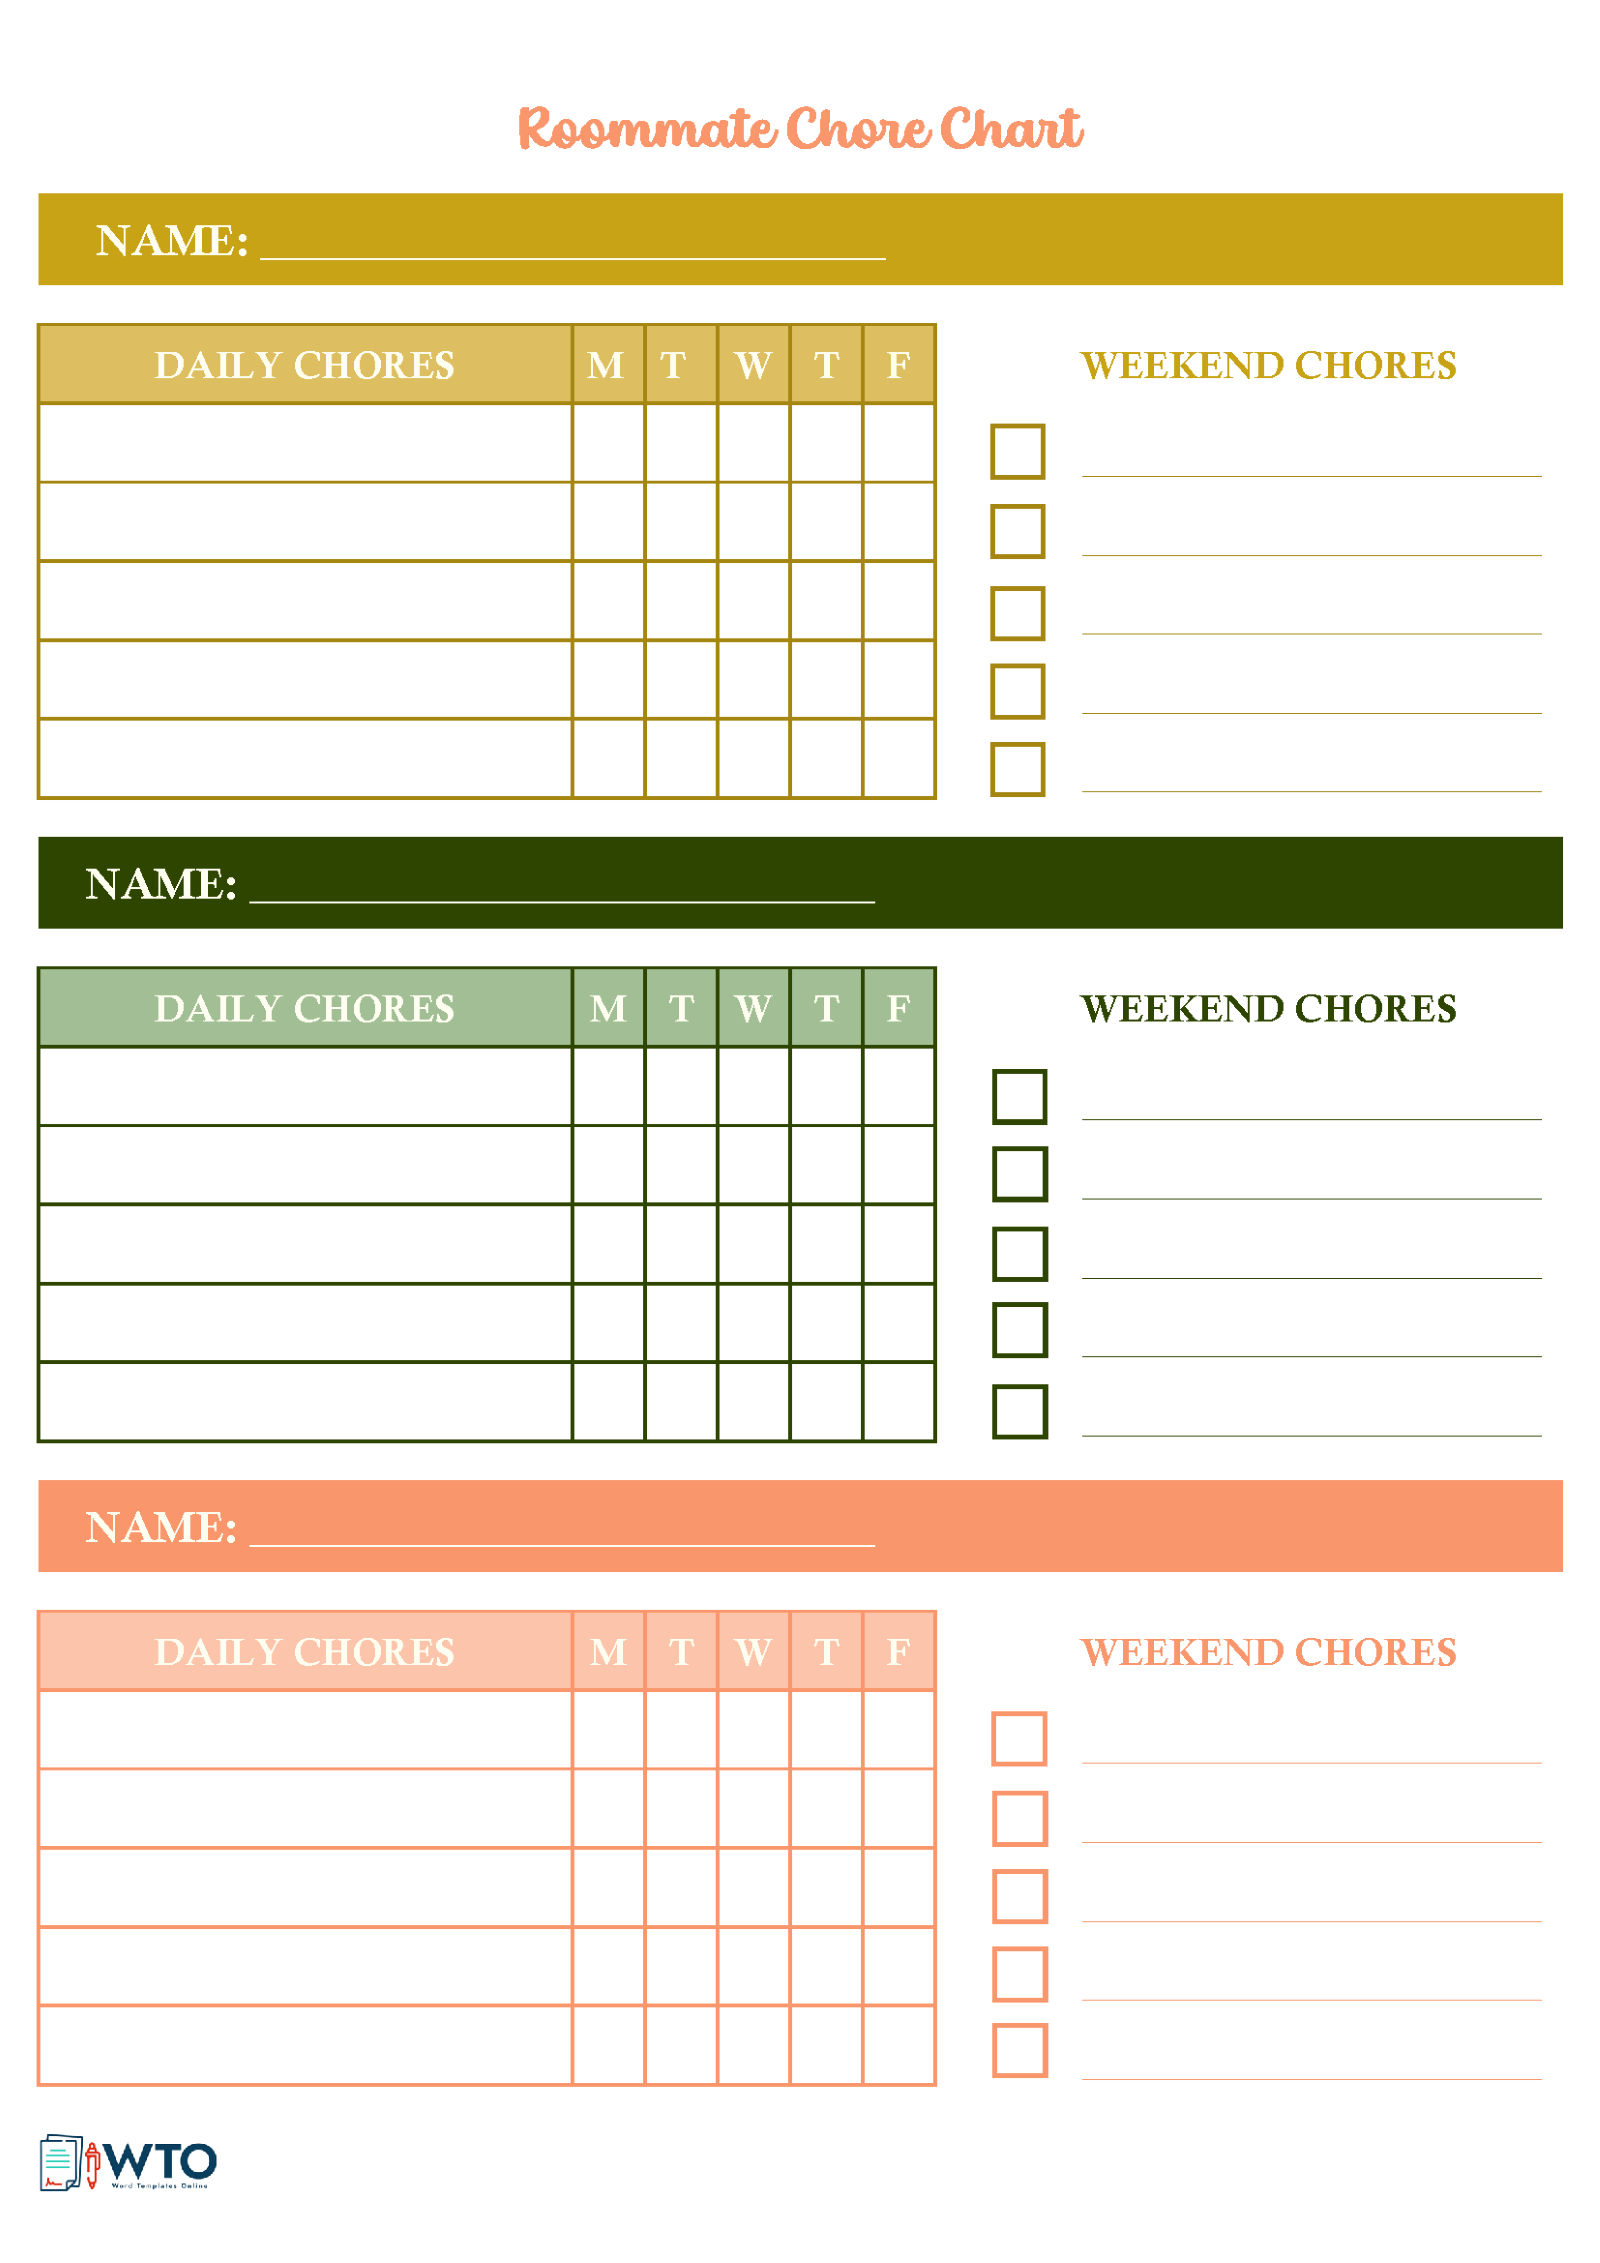 Free Roommate Chore Chart Template: Organize Together